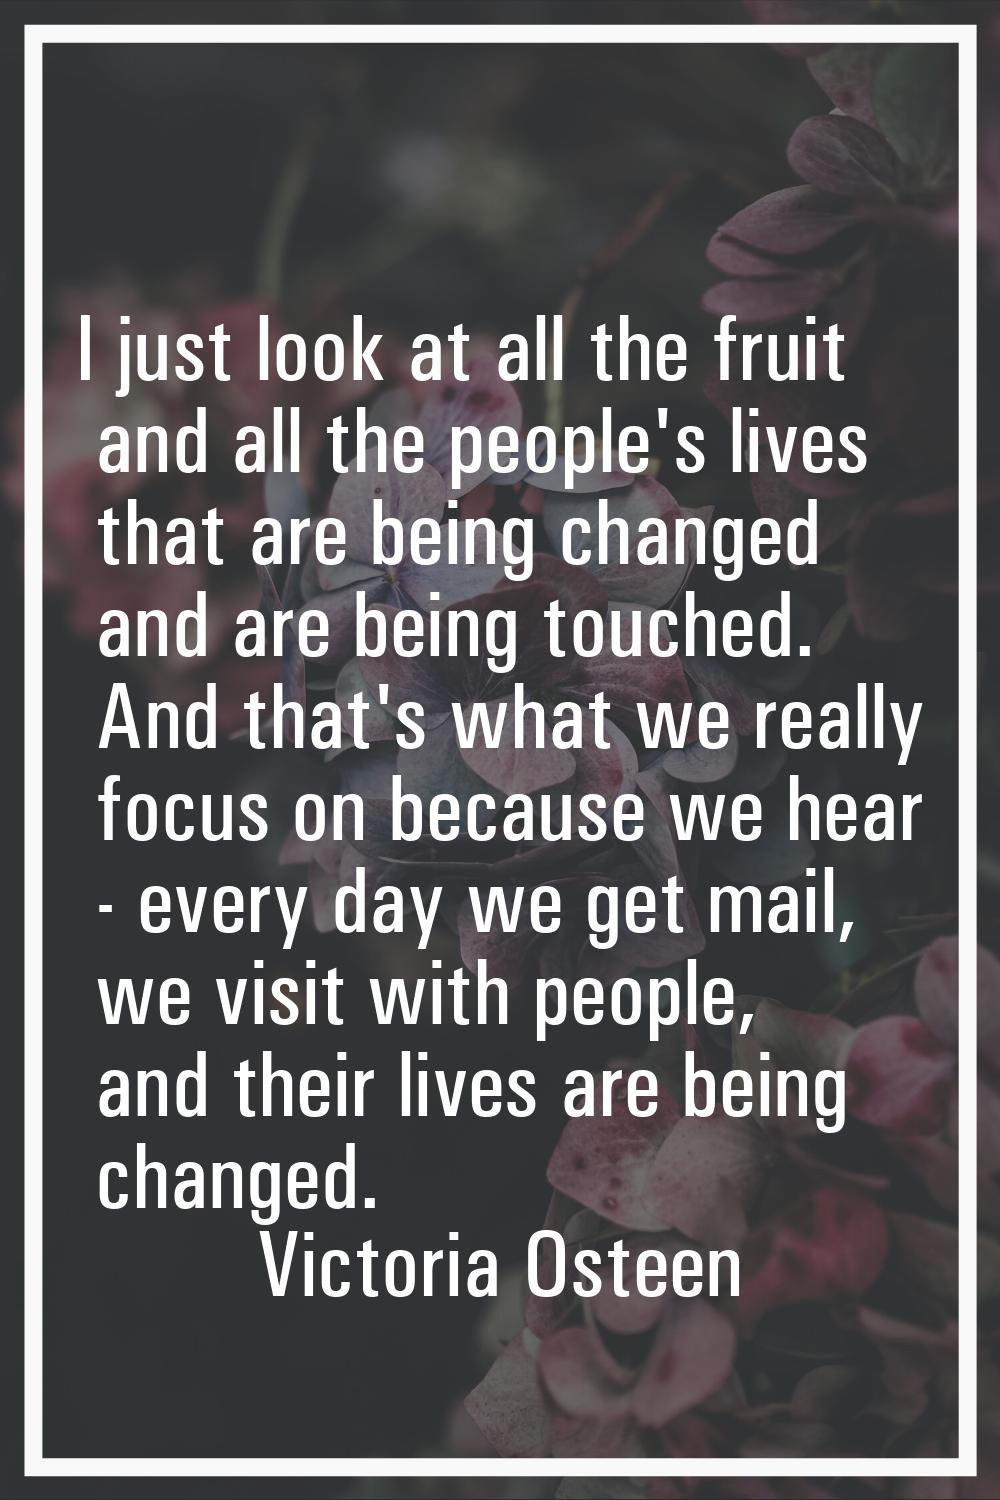 I just look at all the fruit and all the people's lives that are being changed and are being touche